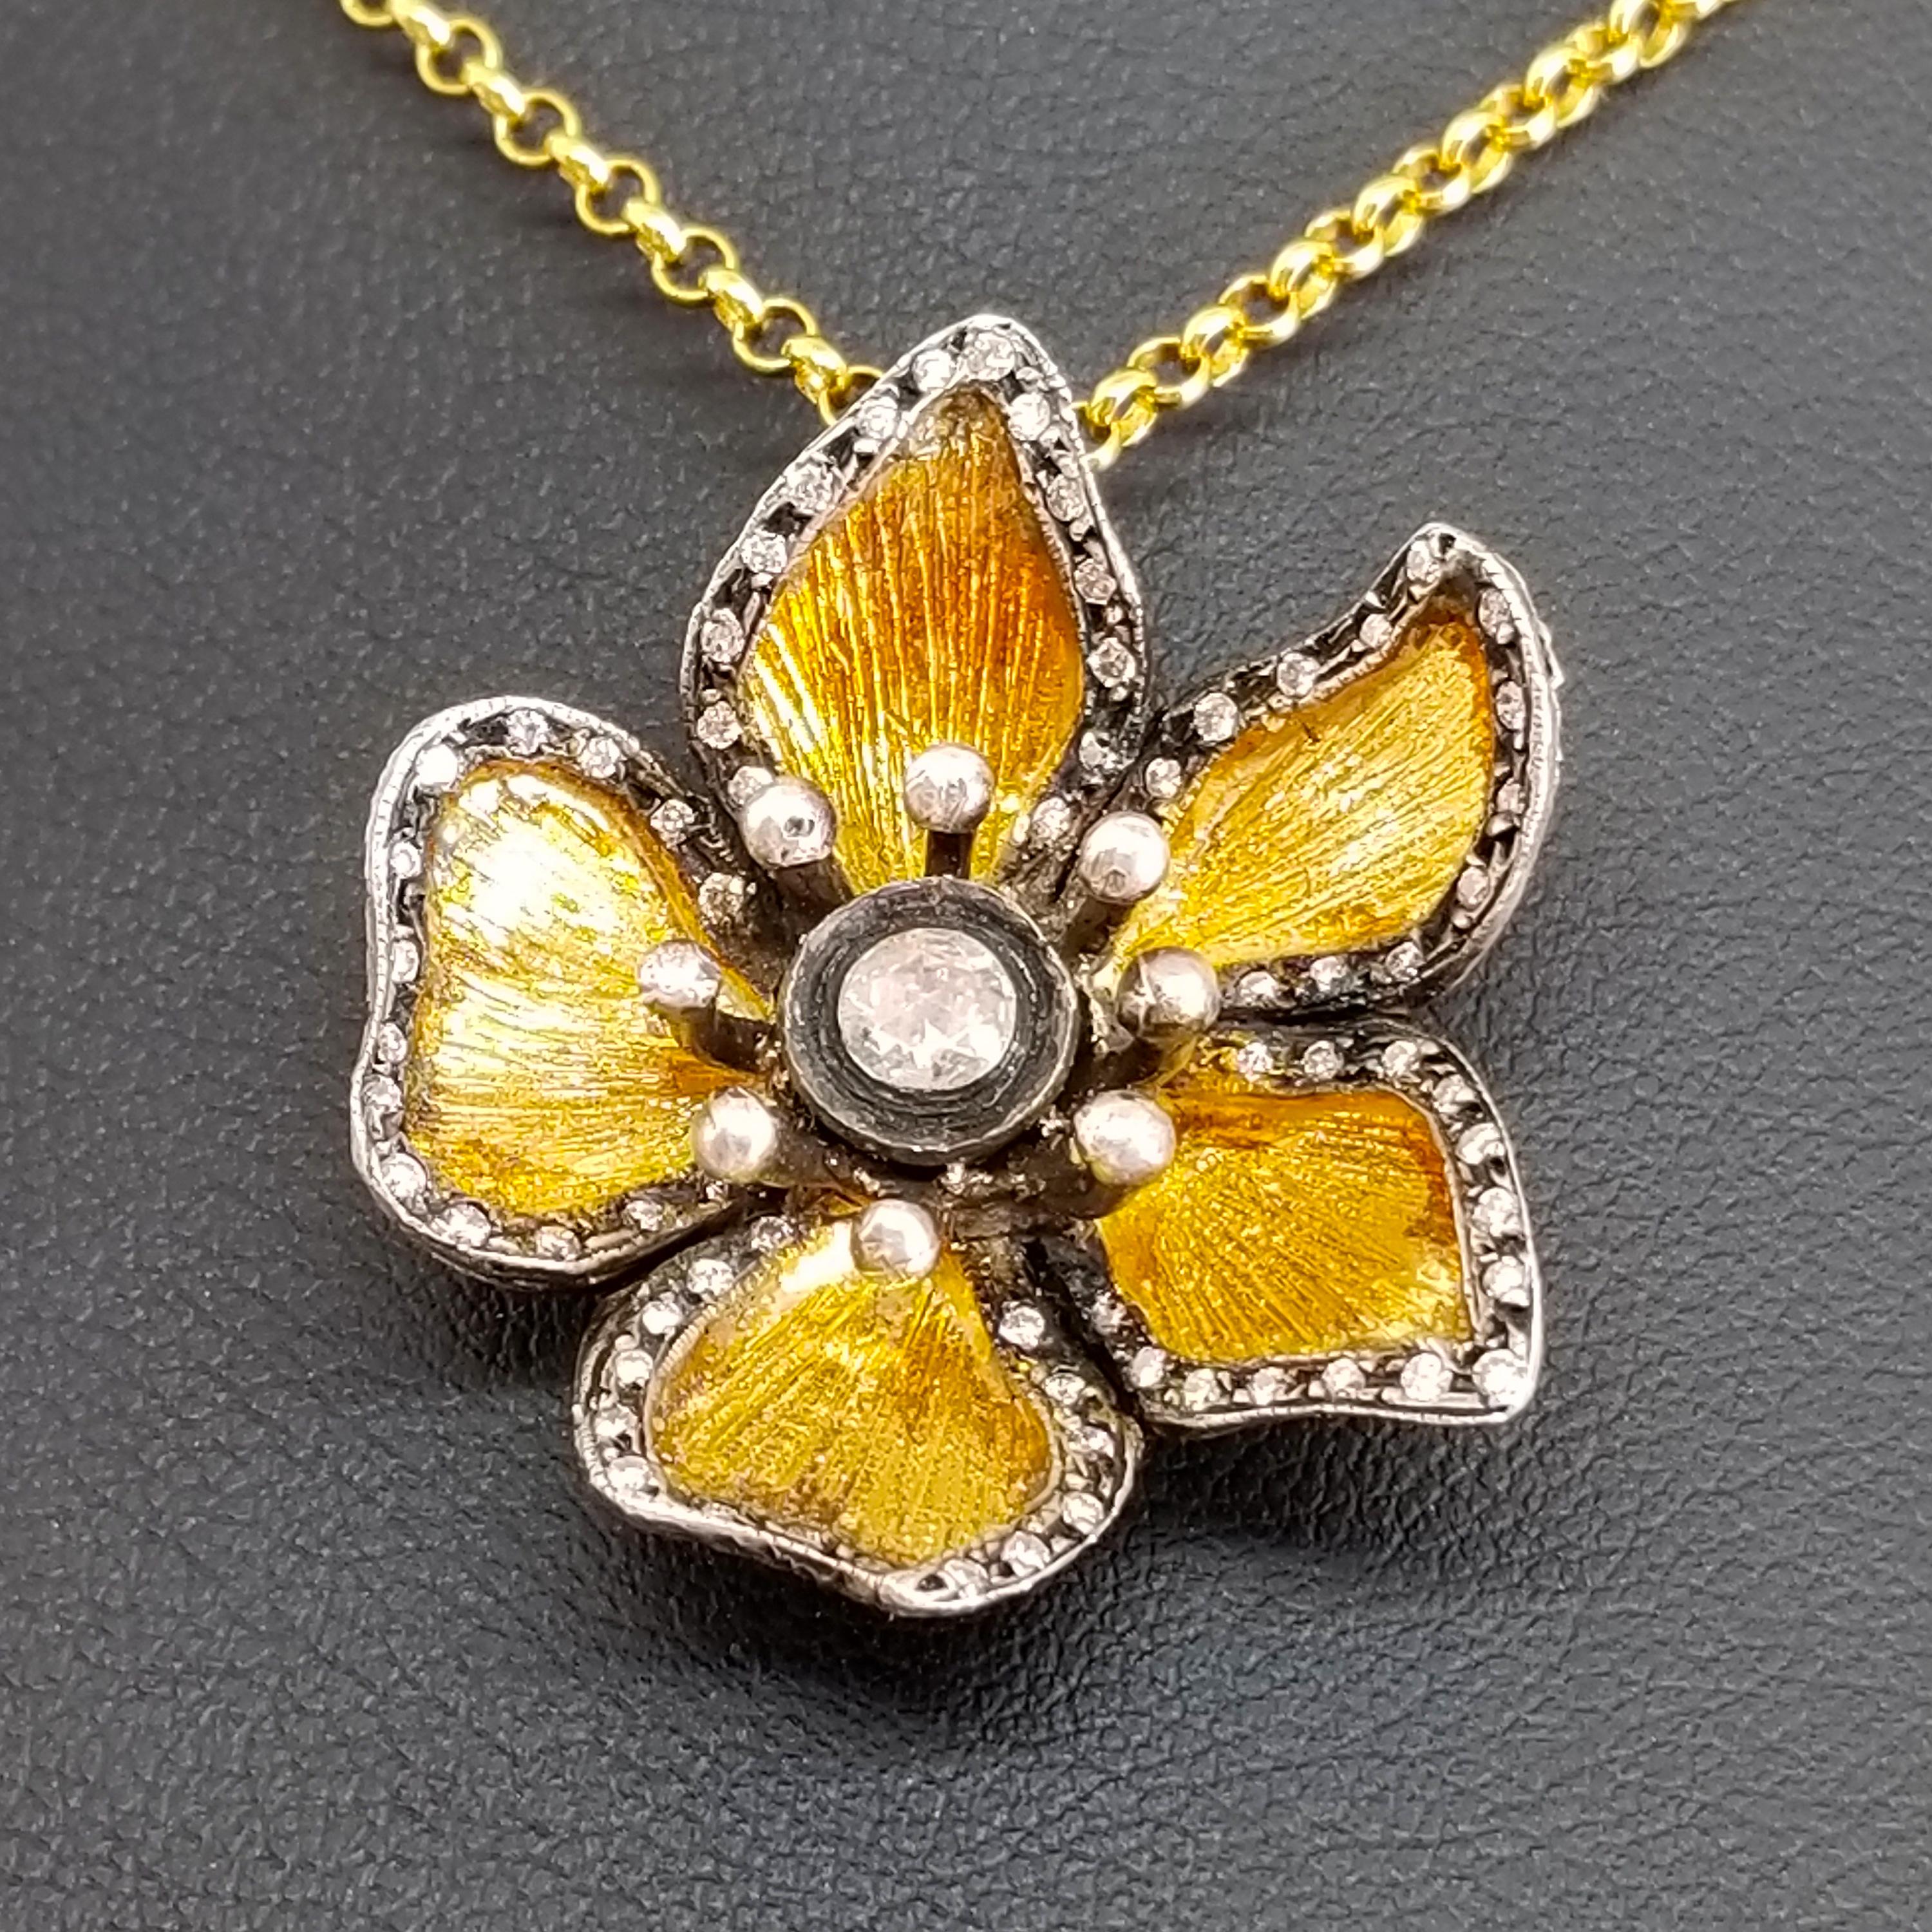 Signed Kurtulan Diamond Flower Pendant and Chain Solid Gold 24 Karat with Silver For Sale 2